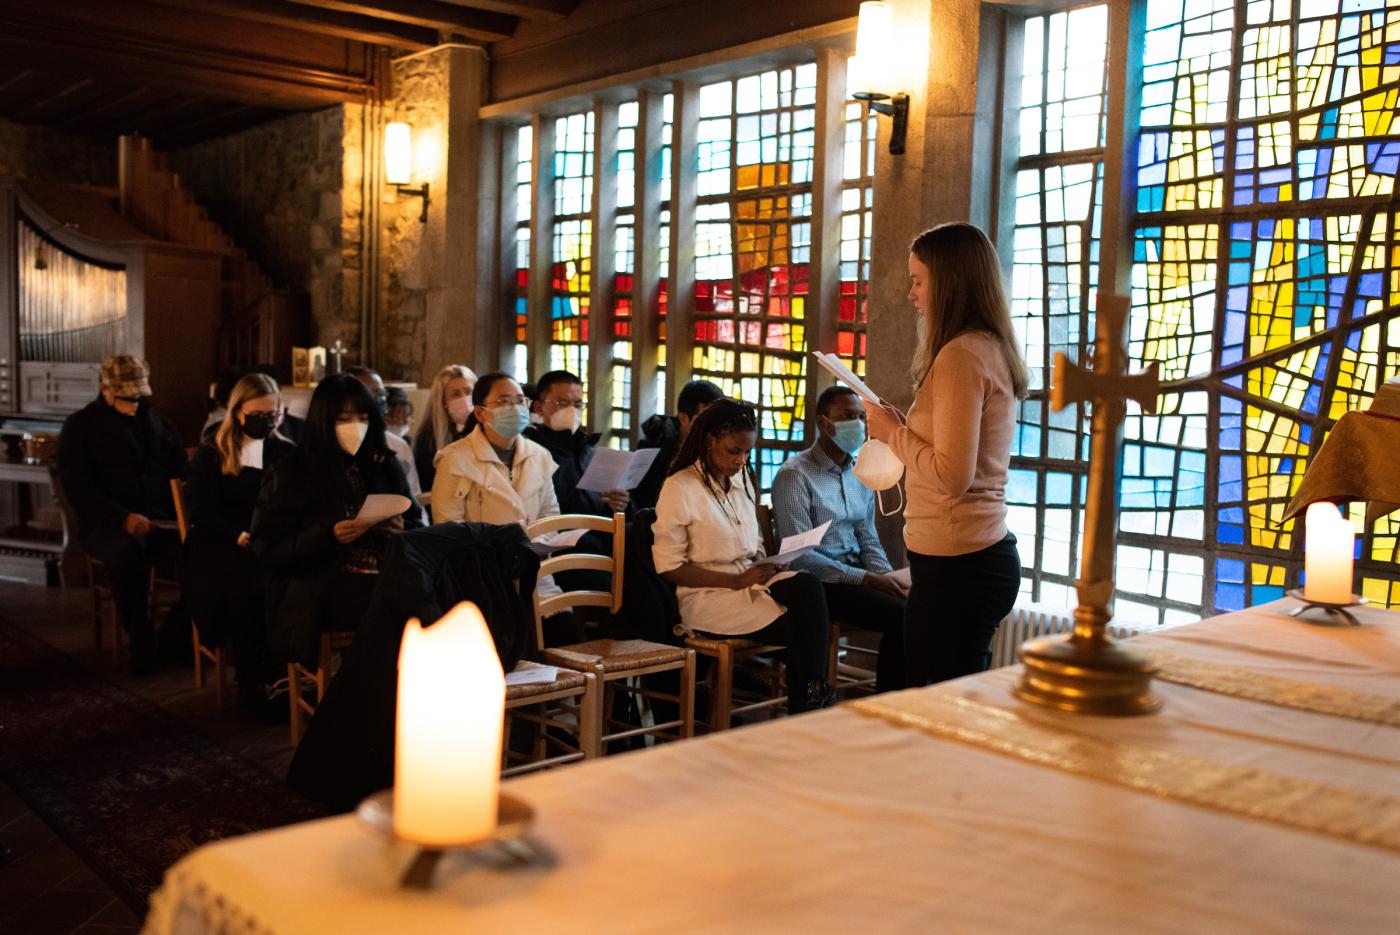 People gathered in a stained glass chapel room, most of them seated, one young woman reading from a paper.